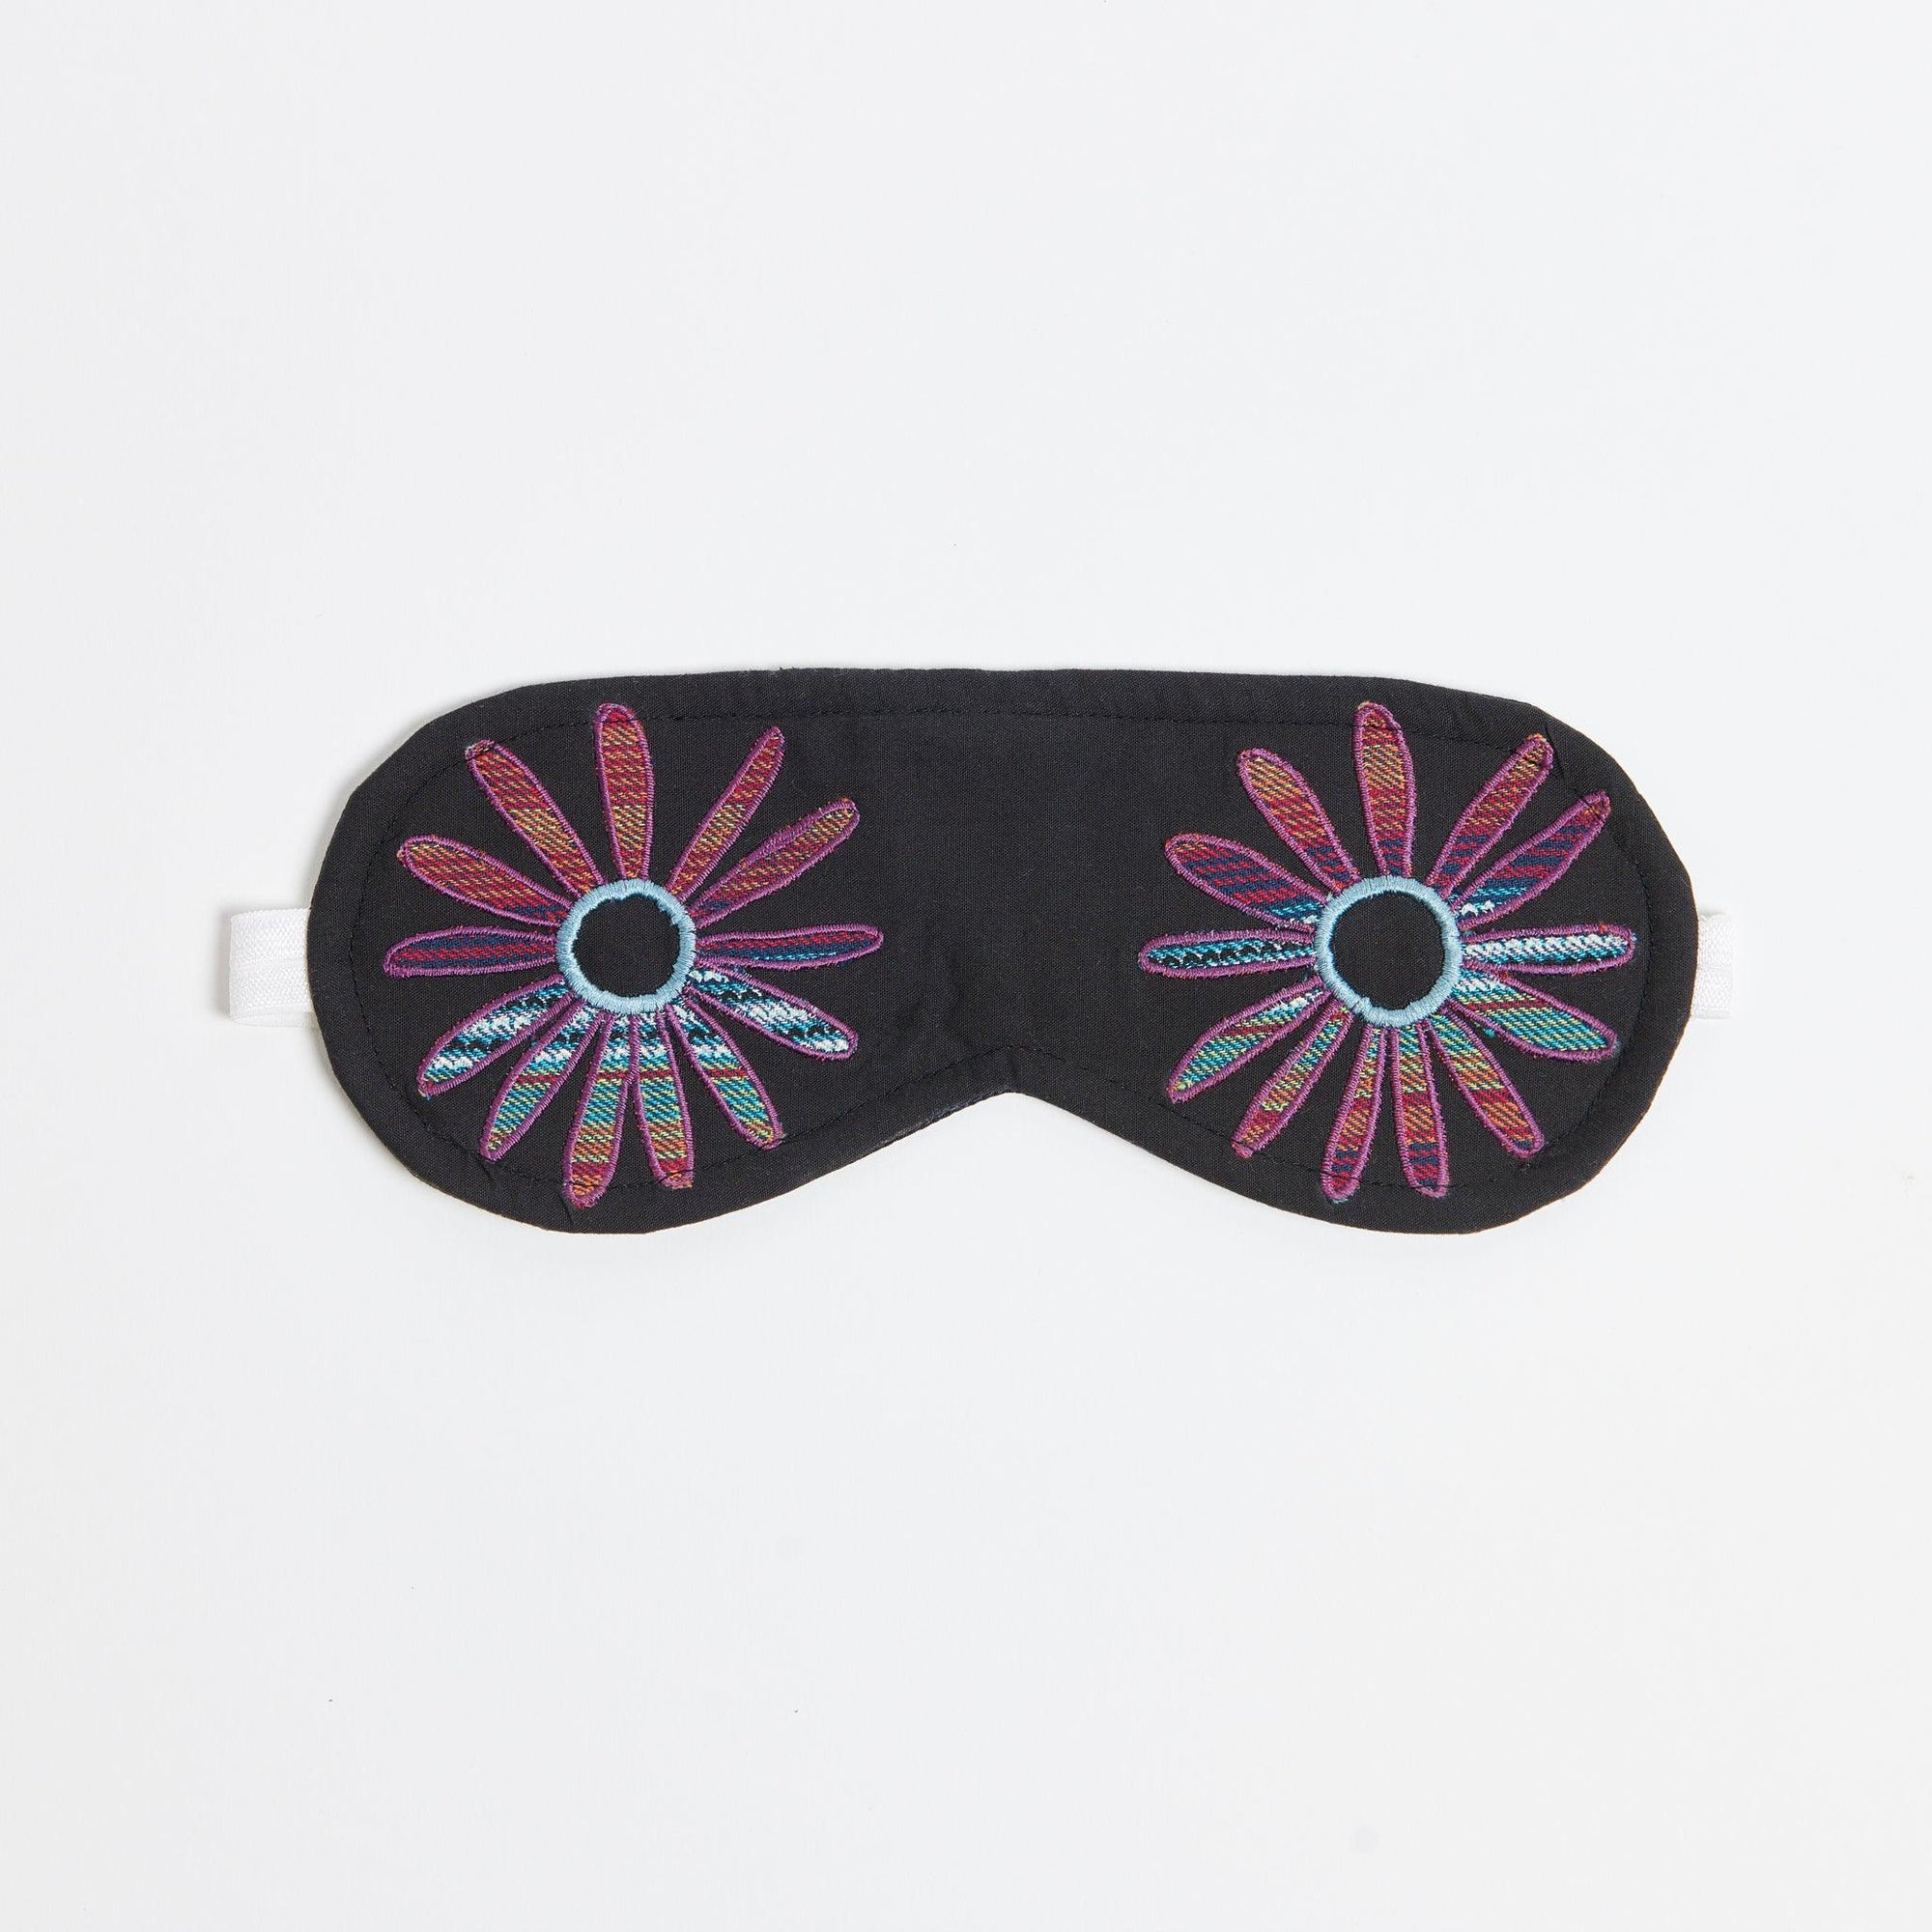 Eye mask on white background. Flower eyes appliqued with  a woven purple blue green fabric. 